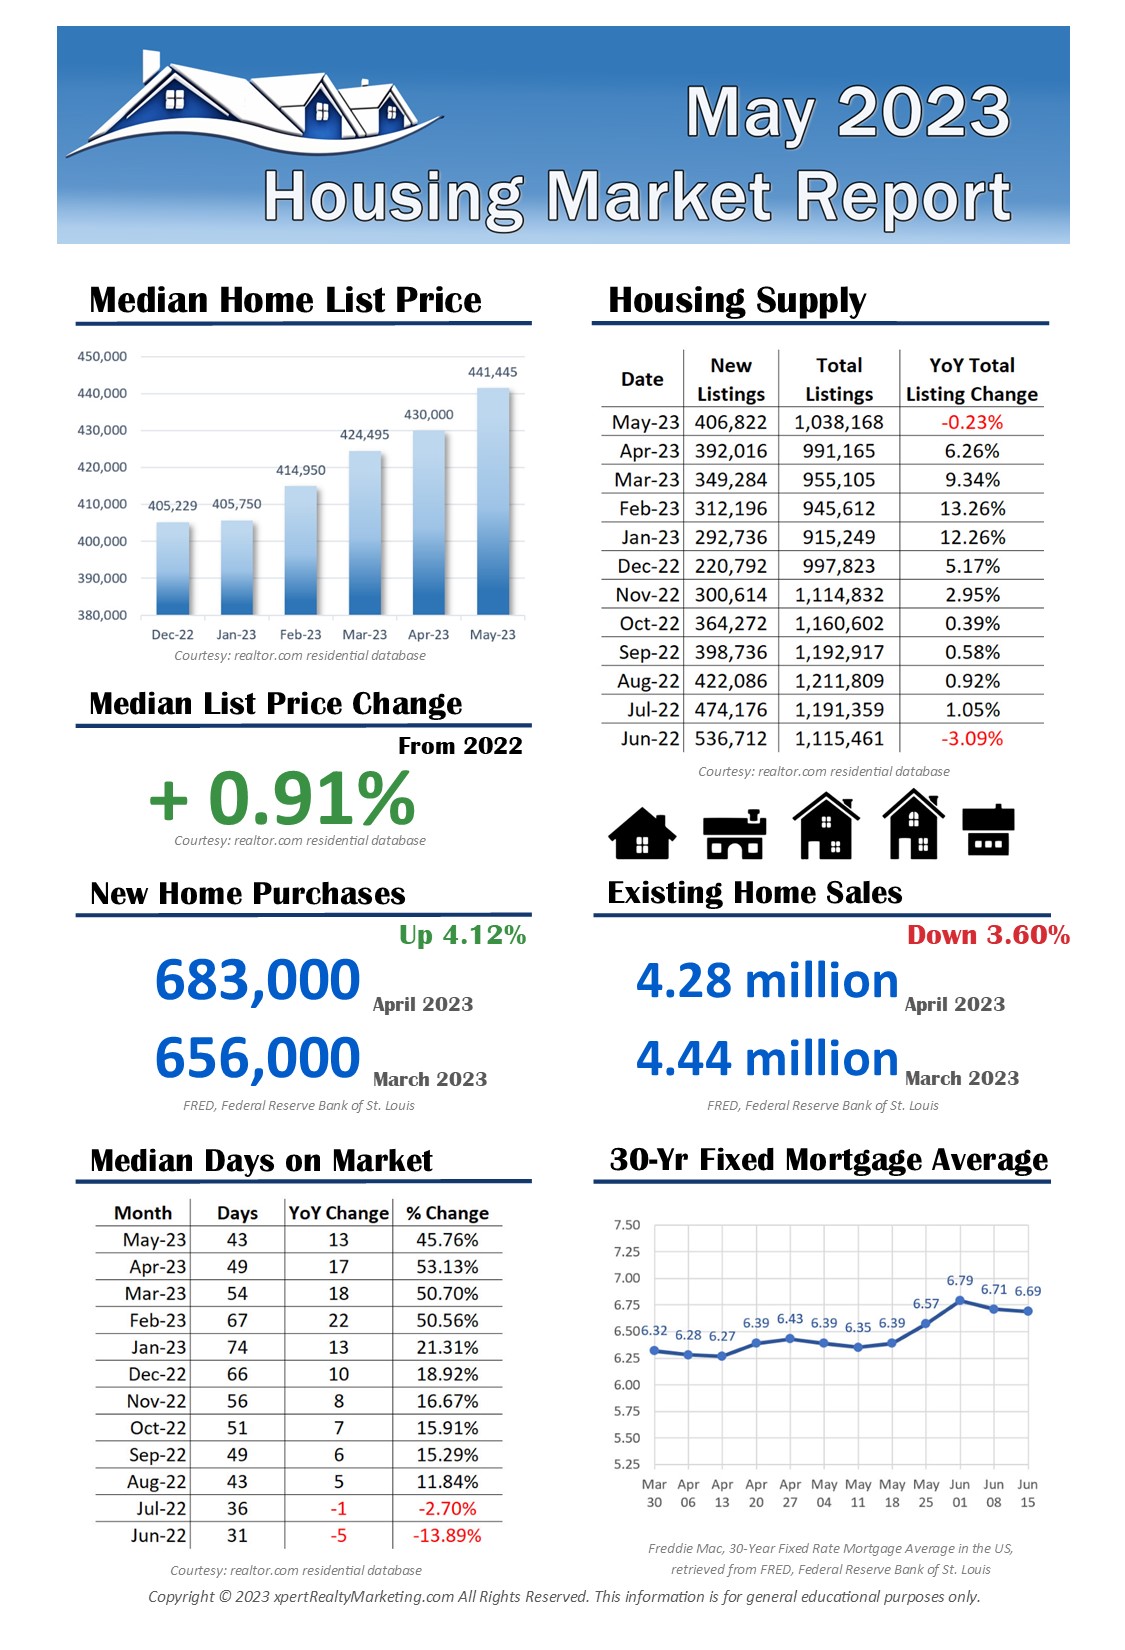 May 2023 U.S. Housing Market Report Infographic